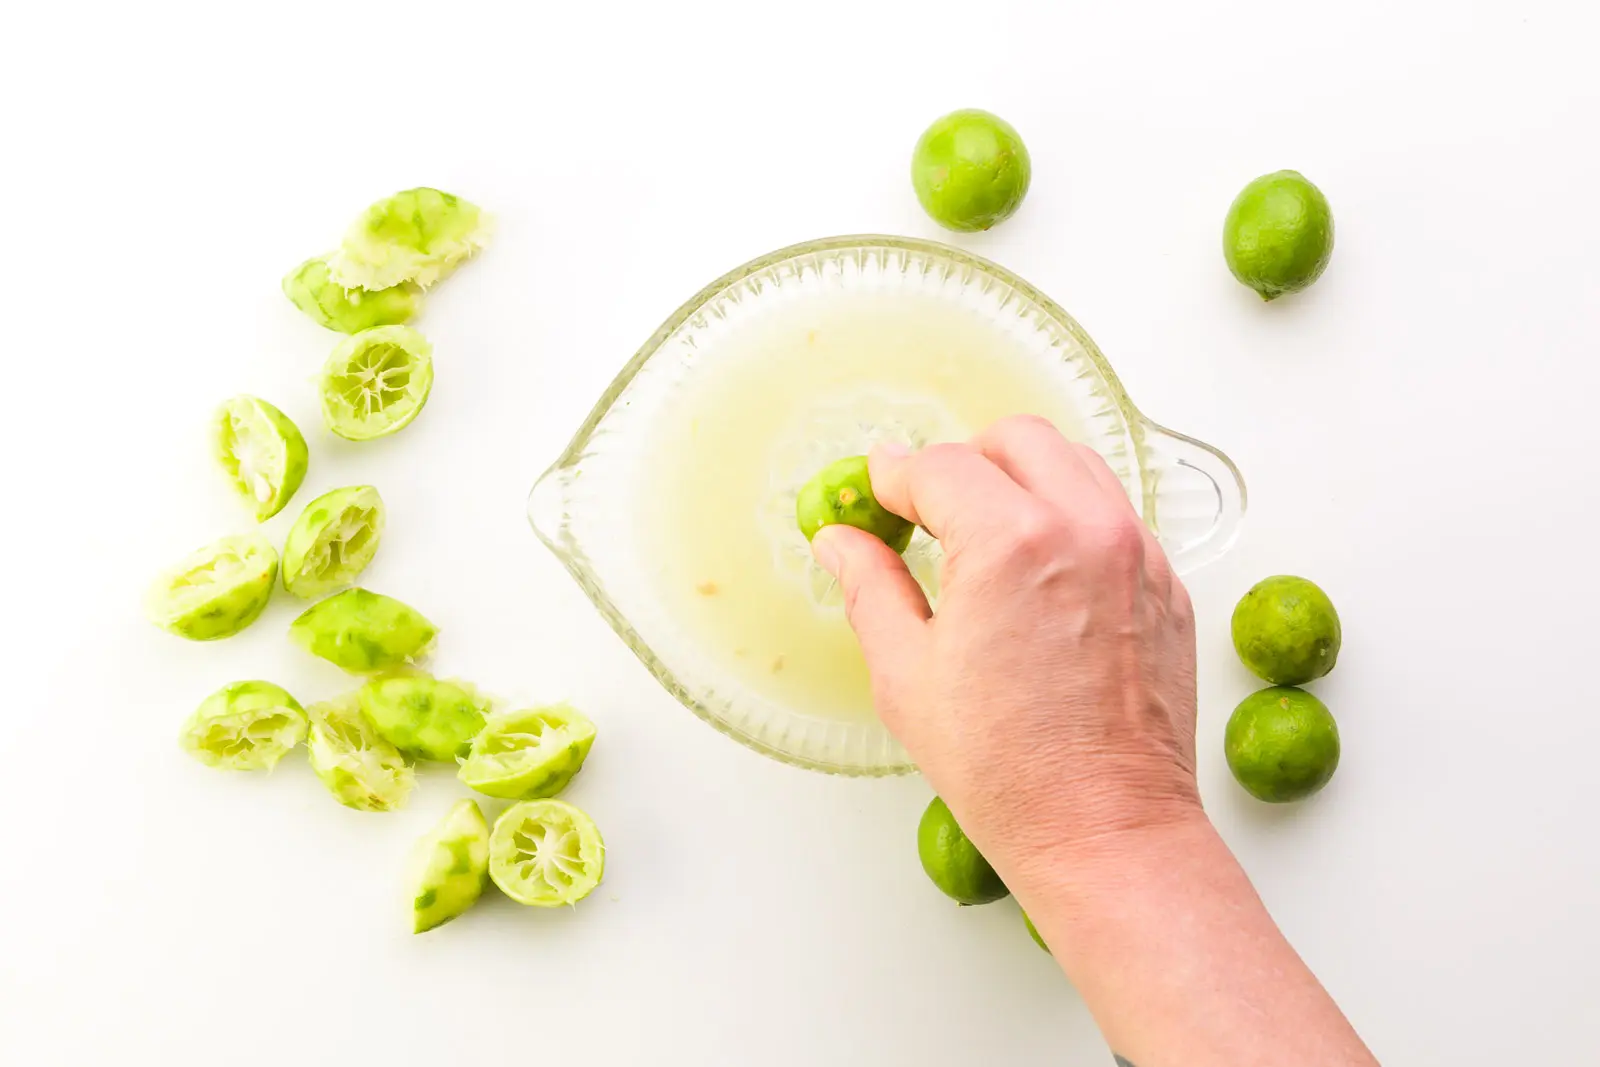 A hand holds a key lime on a glass zester. There are fresh key limes around it along with several key limes that have already been juiced.